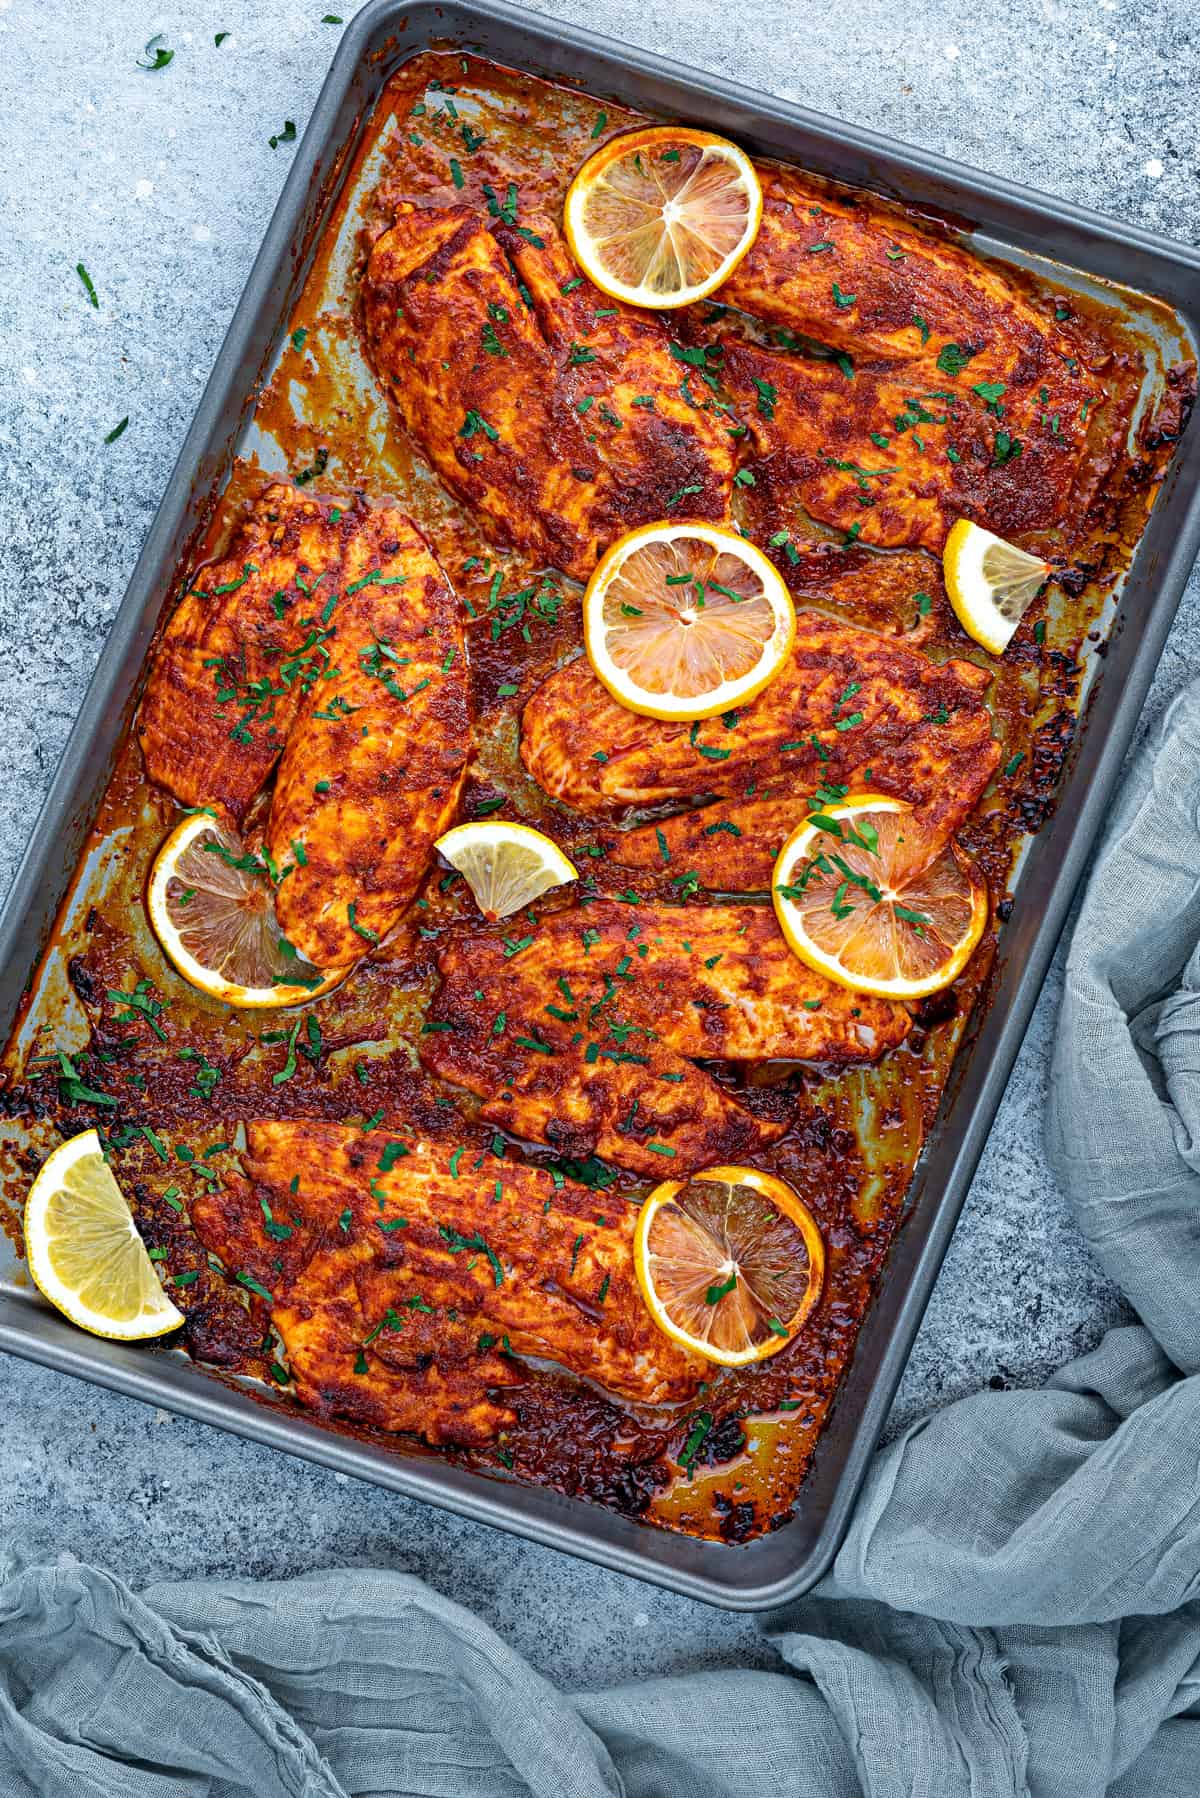 Top down view sheet pan with 6 chili lemon baked tilapia fillets with fresh lemon slices.